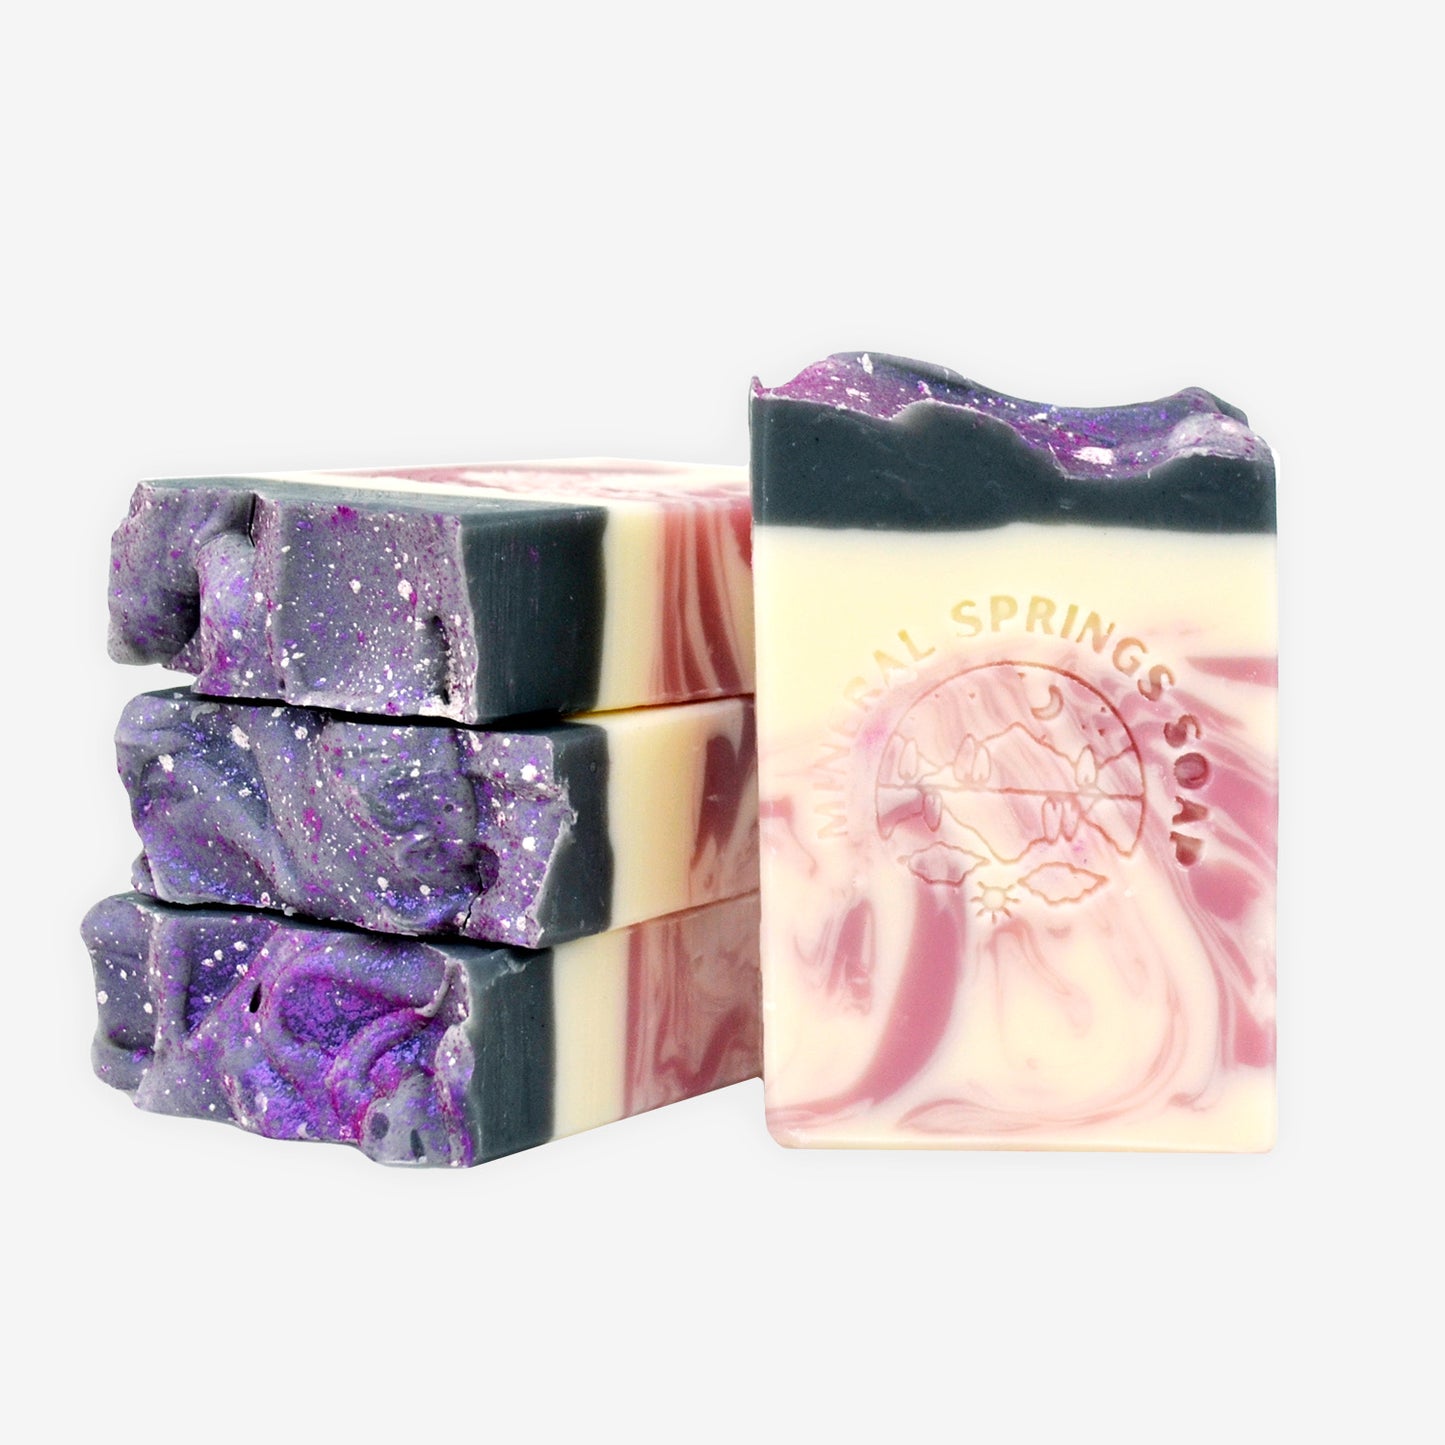 Flourish Anise Mint Handcrafted Soap